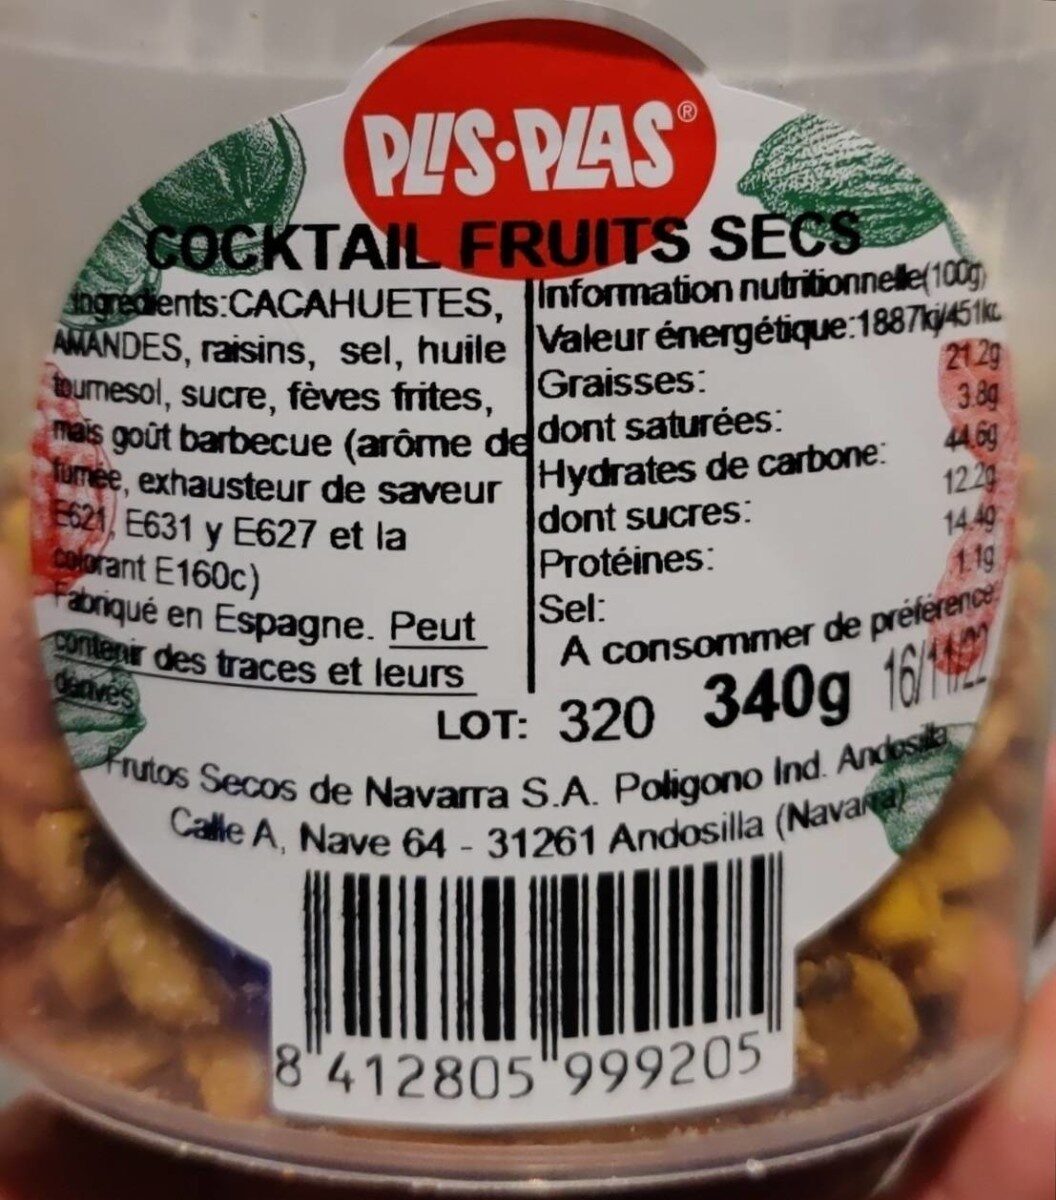 Cocktail Fruits Sec, - Nutrition facts - fr